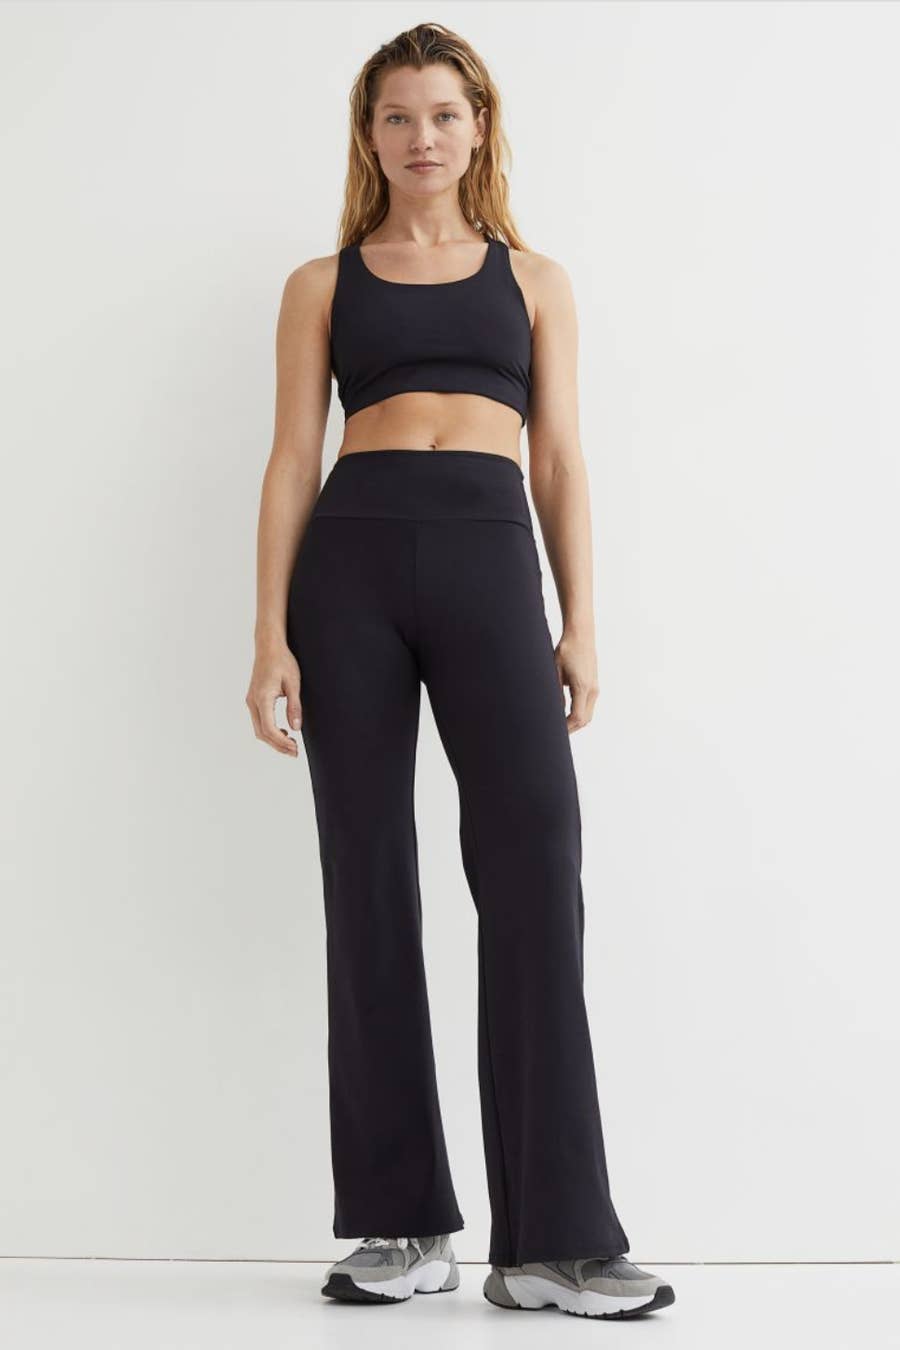 Where to Buy Cheap Workout Clothes That Look Good and Actually Last The  Real Deal by RetailMeNot